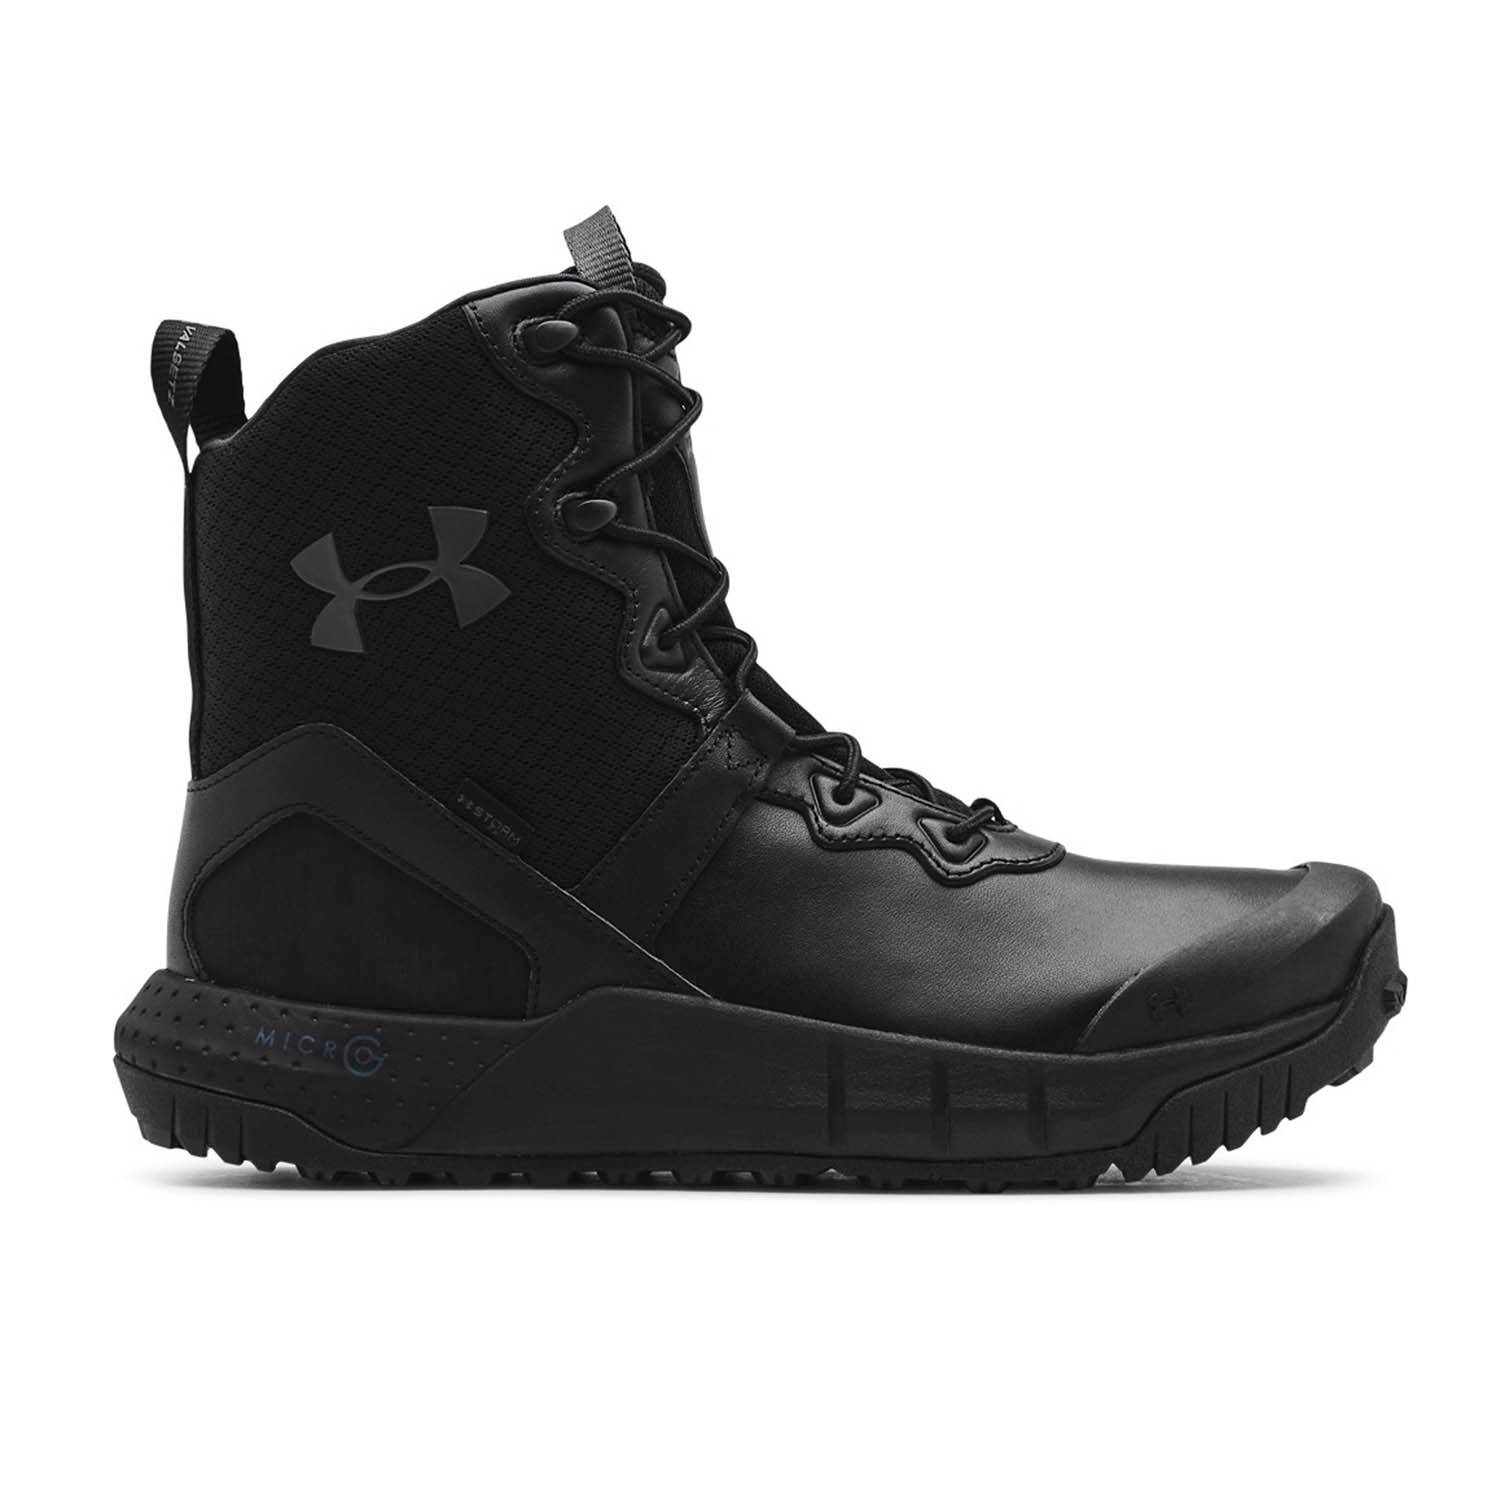 Under Armour Micro G Valsetz Leather Waterproof Tac Boots